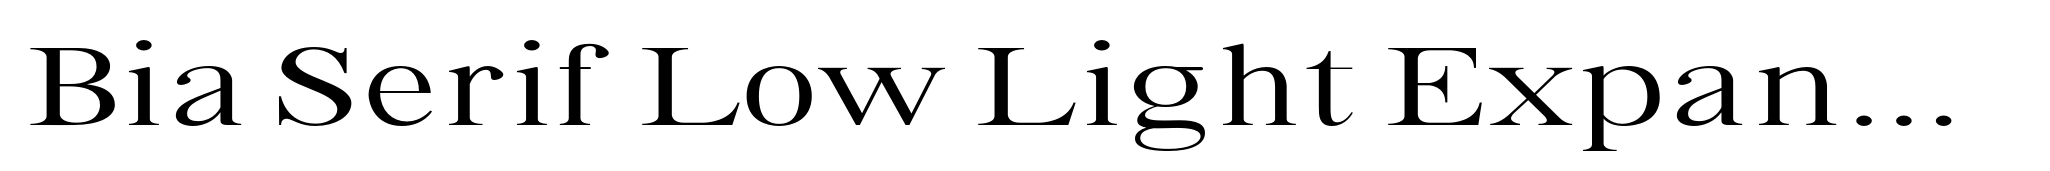 Bia Serif Low Light Expanded image